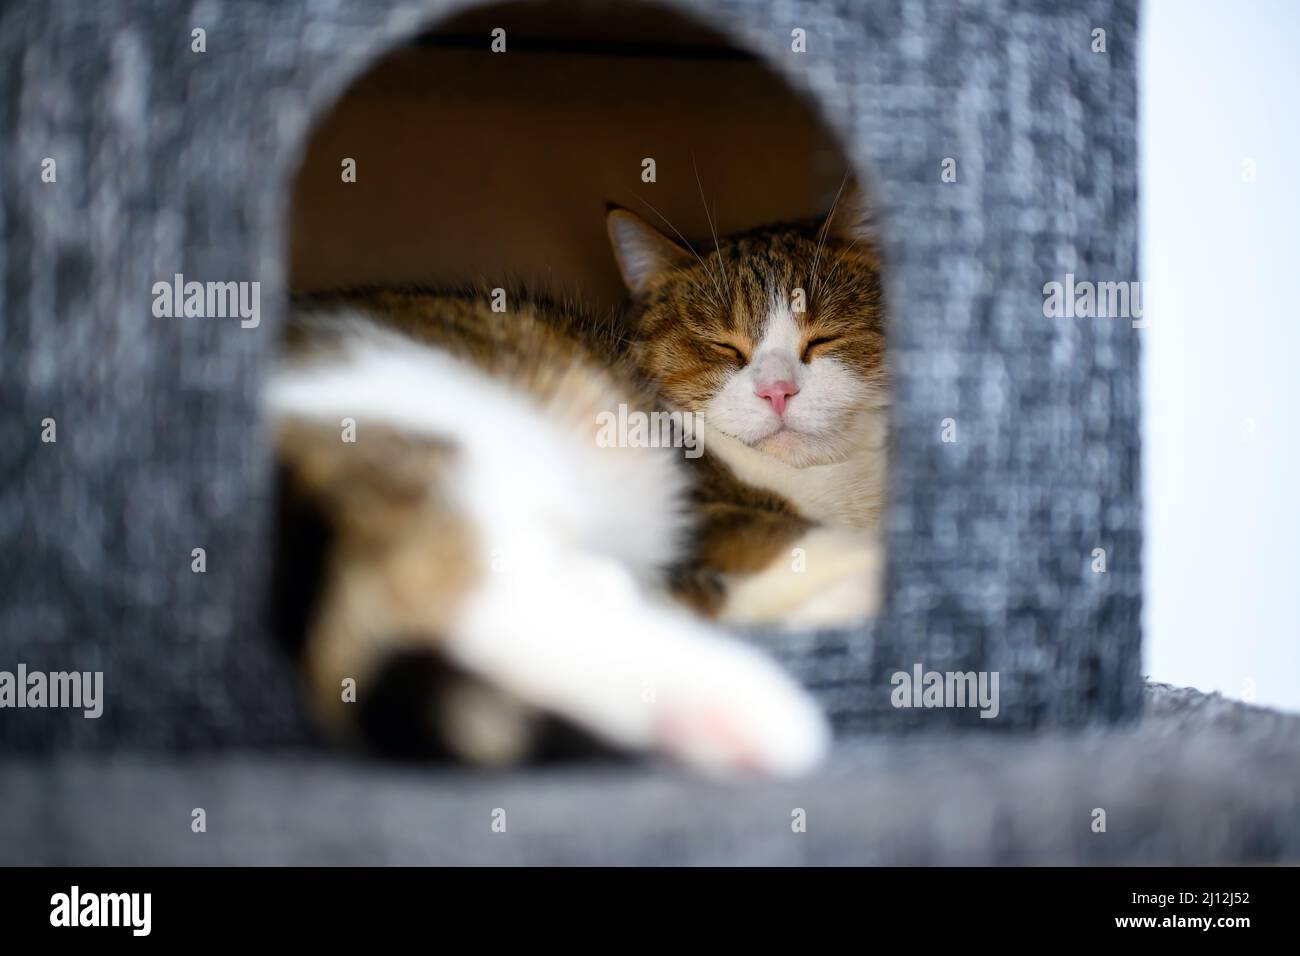 Young cat goes to sleep in a box, a decorative toy for cats. A striped Scottish cat sleeps in a niche. It felt safe and comfortable, the cat was makin Stock Photo